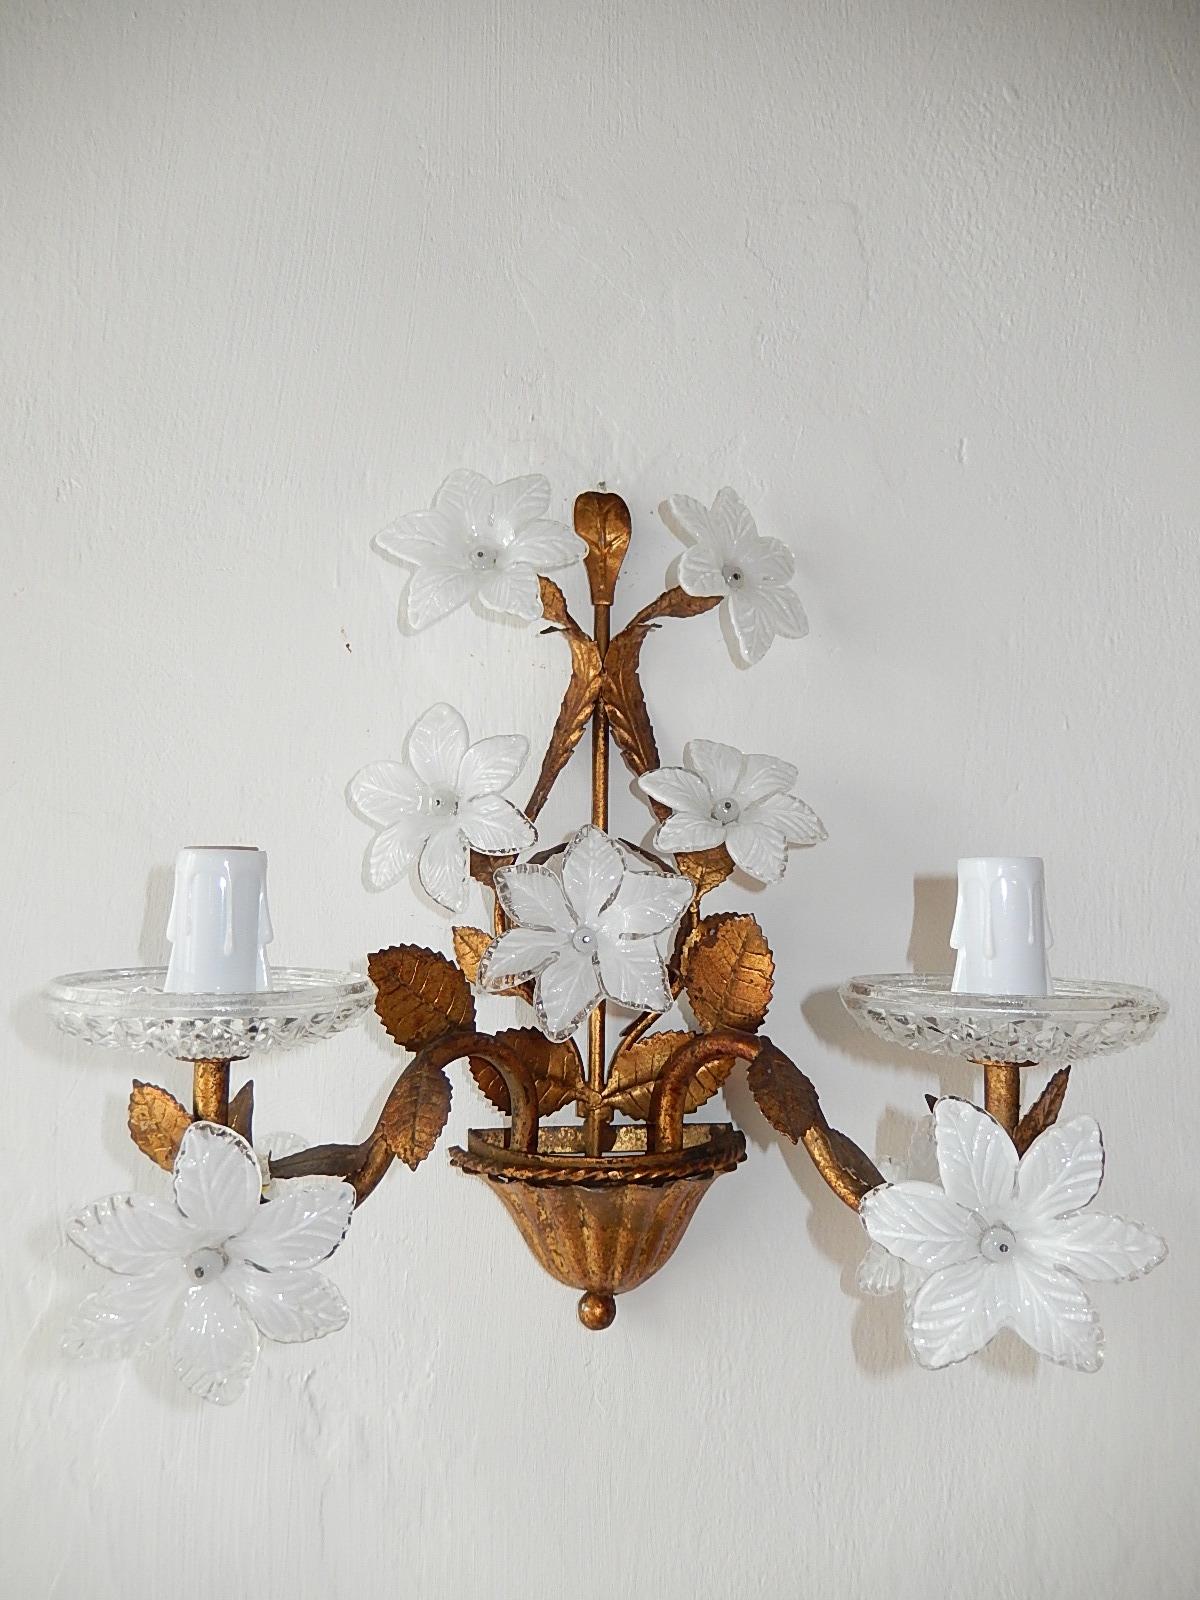 Will be rewired and ready to hang with appropriate country sockets. Housing 2 lights each, sitting in crystal cut bobeches. Tole sconces with great details and patina. Adorning big white opaline Murano flowers and beads. Free priority UPS shipping